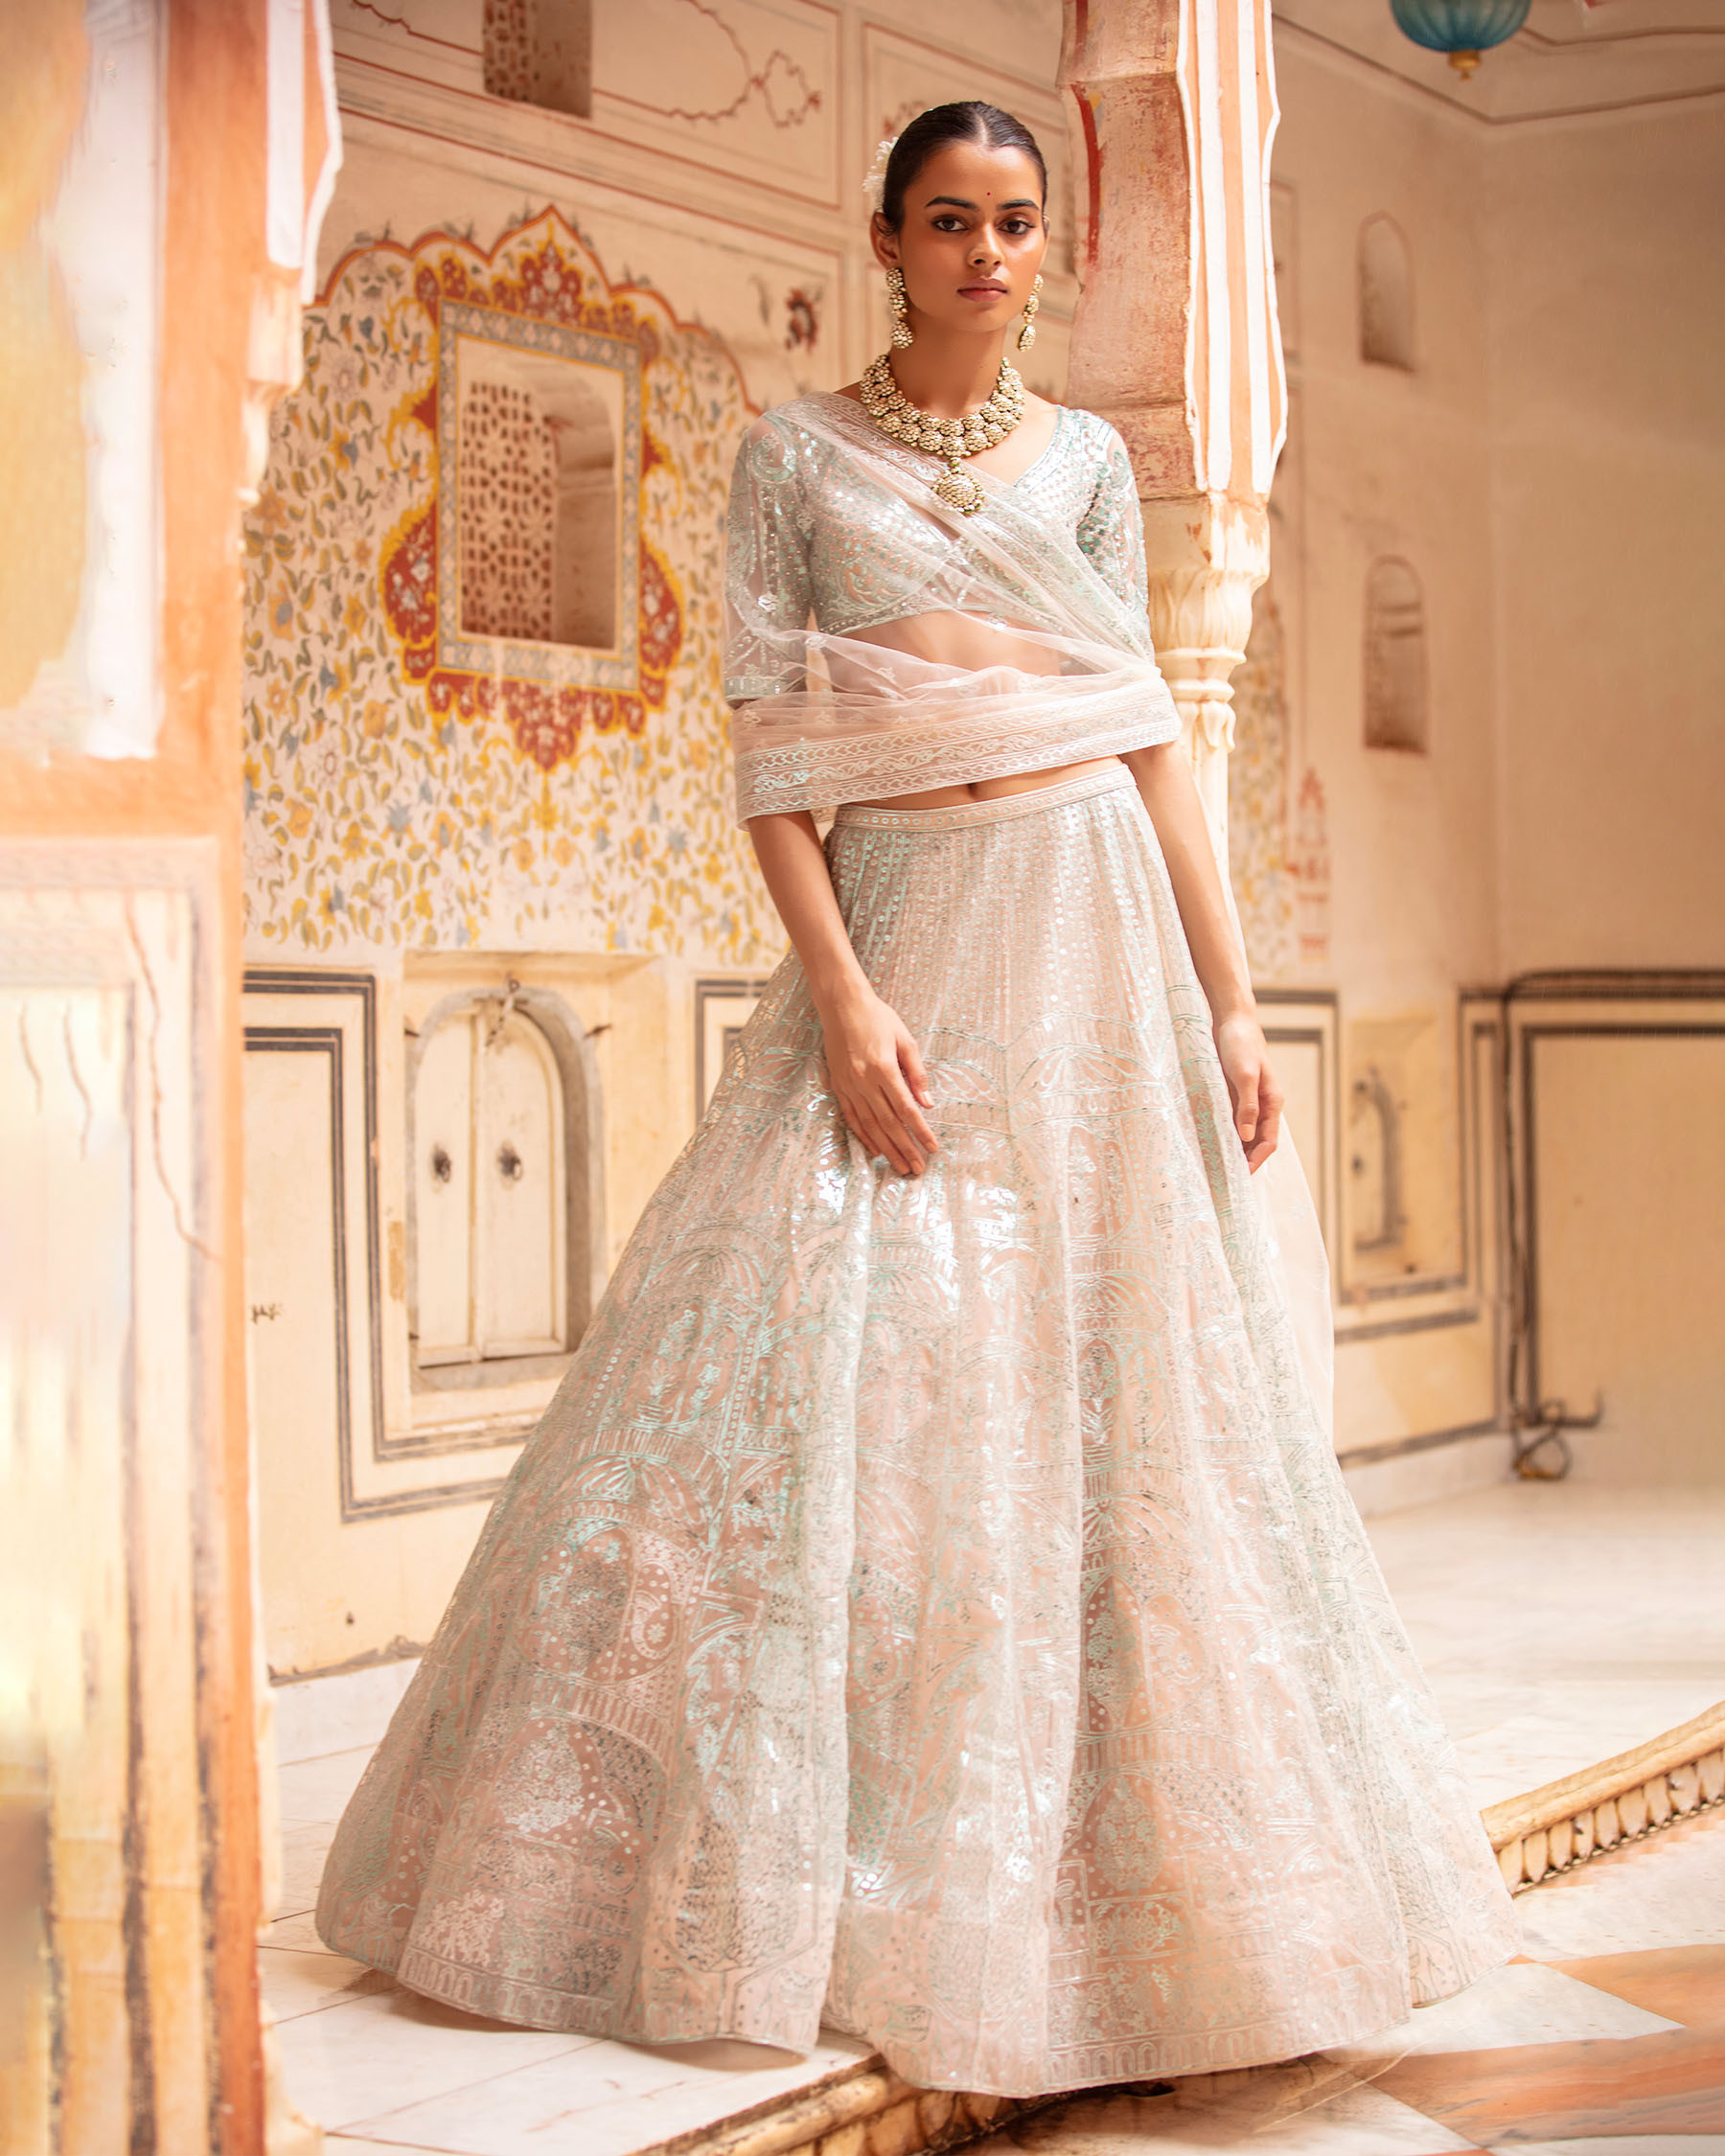 AMBROSE• Adorn yourself in elegance with our metallic grey lehenga choli.  The lama choli gleams with crystal sequins and beads, crea... | Instagram